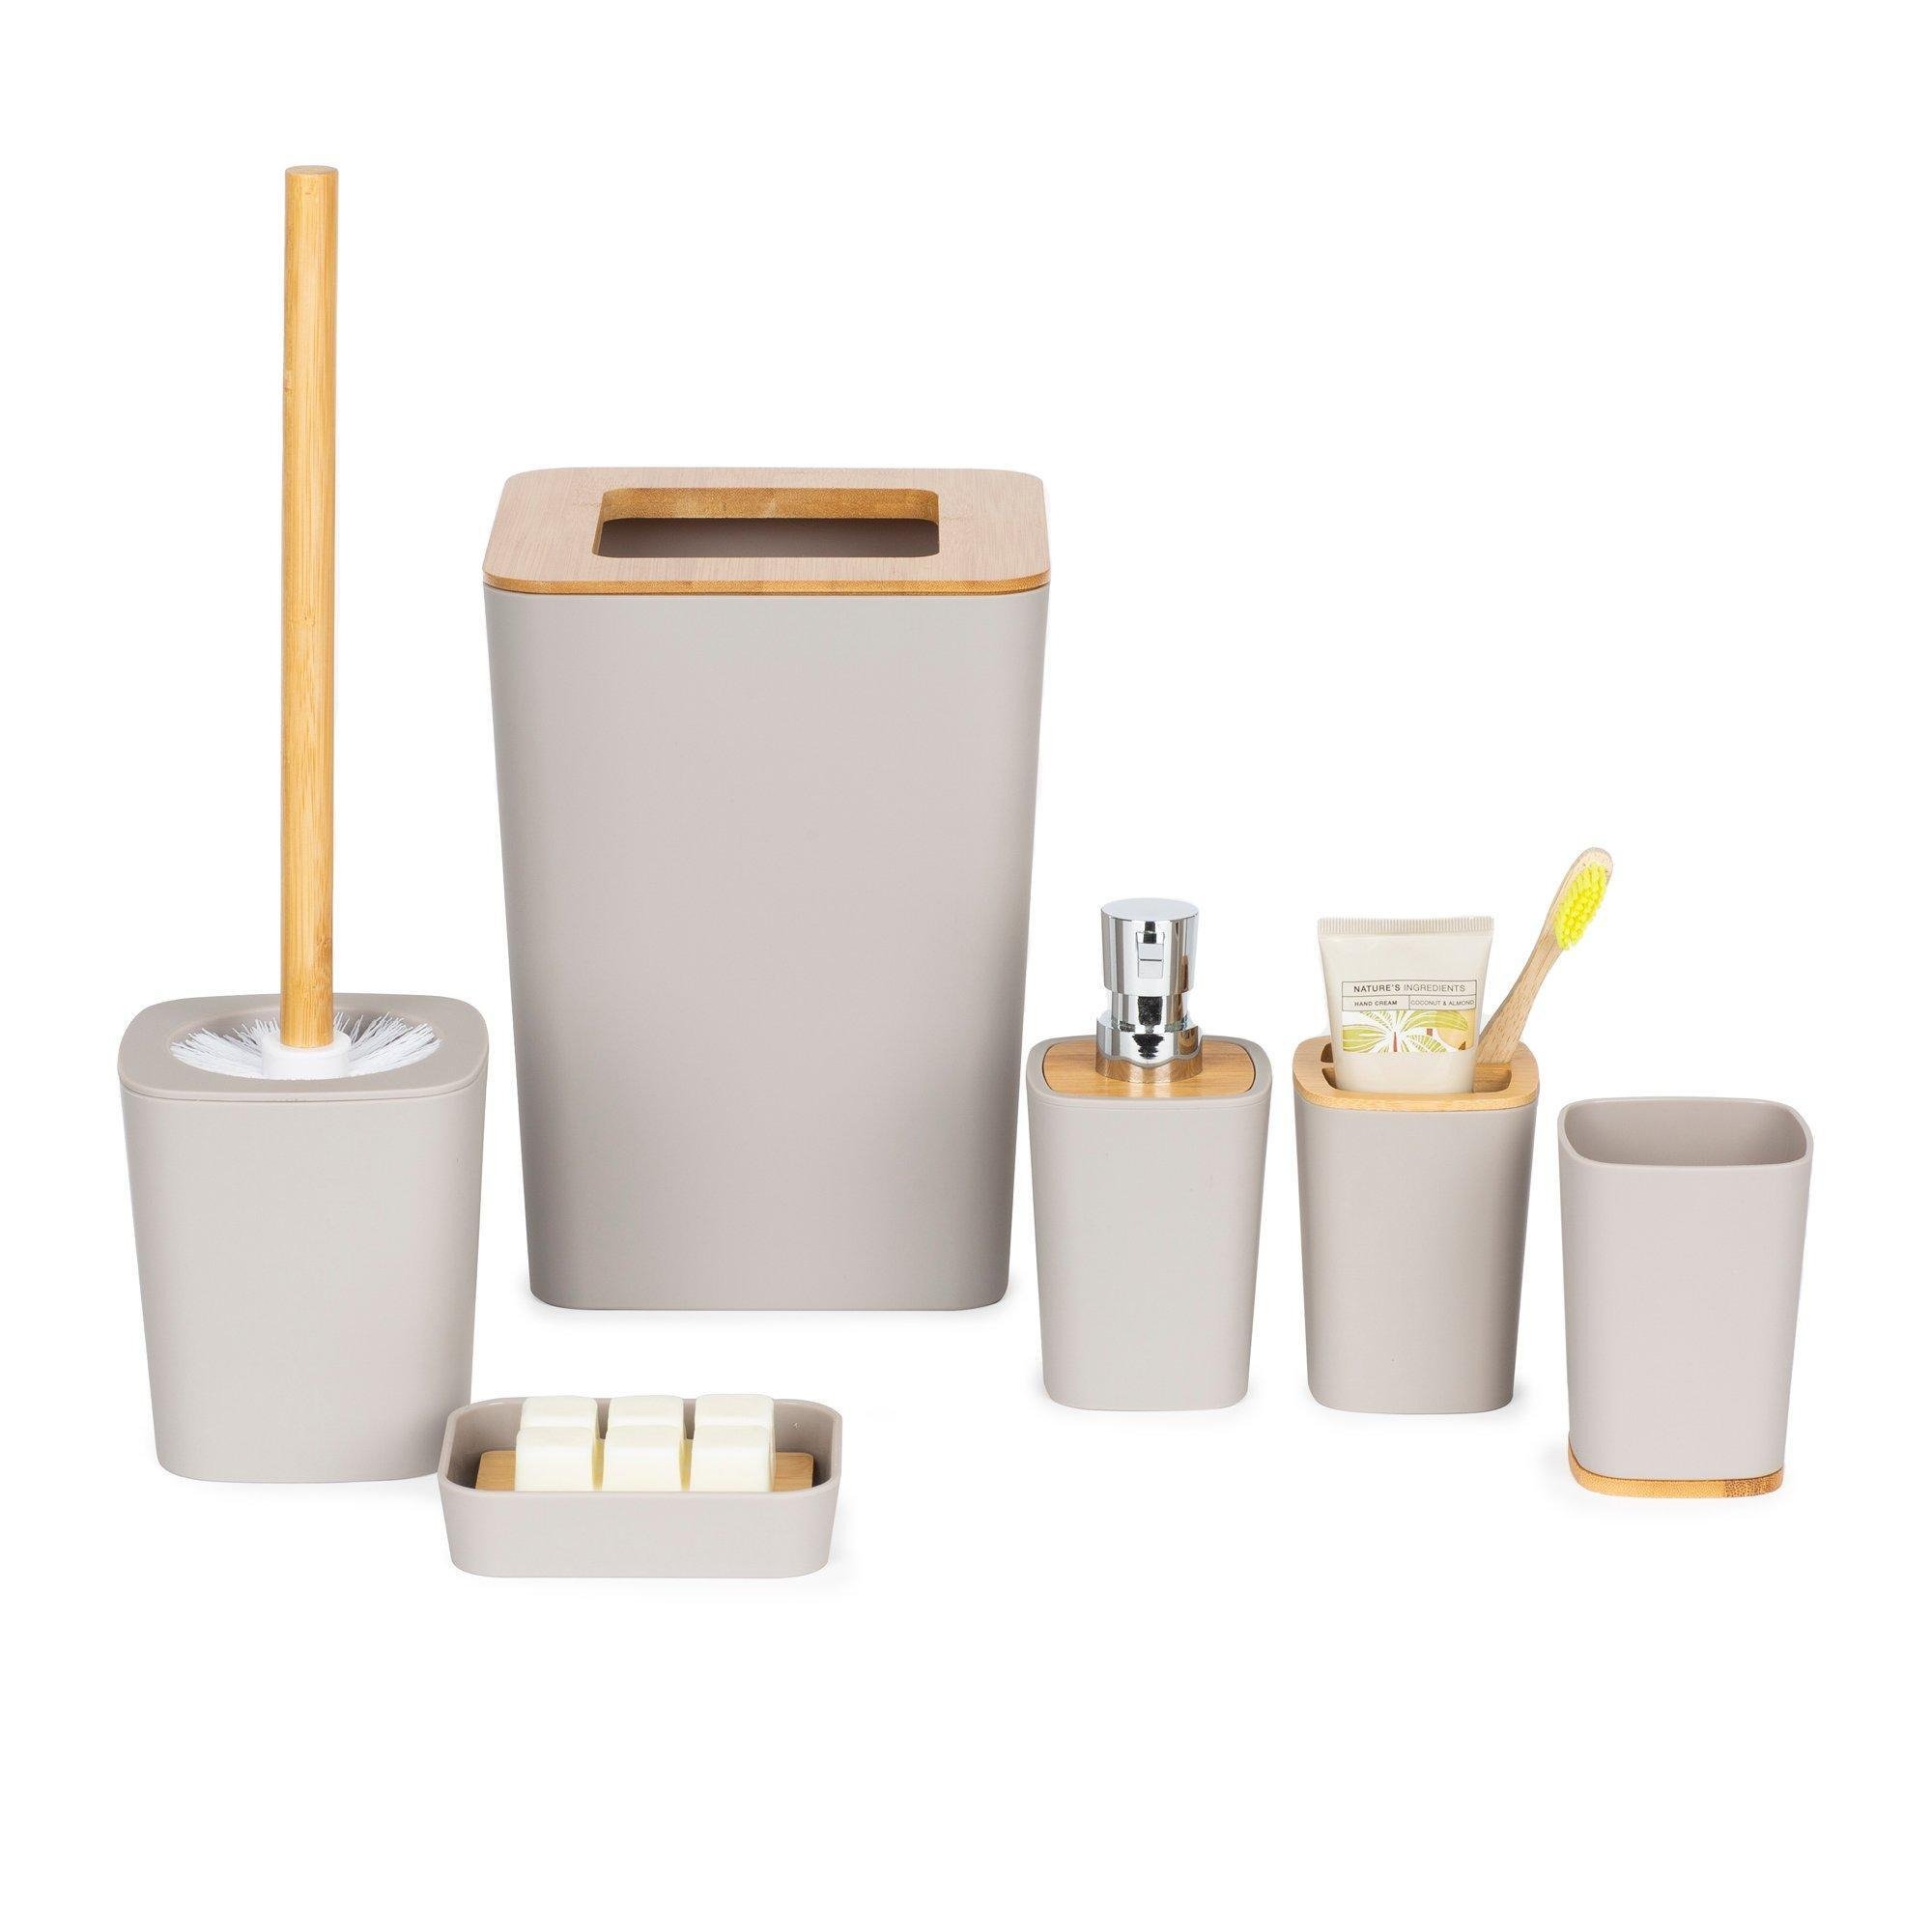 6-Piece Bathroom & Sink Accessory Set with Bamboo Trim - image 1